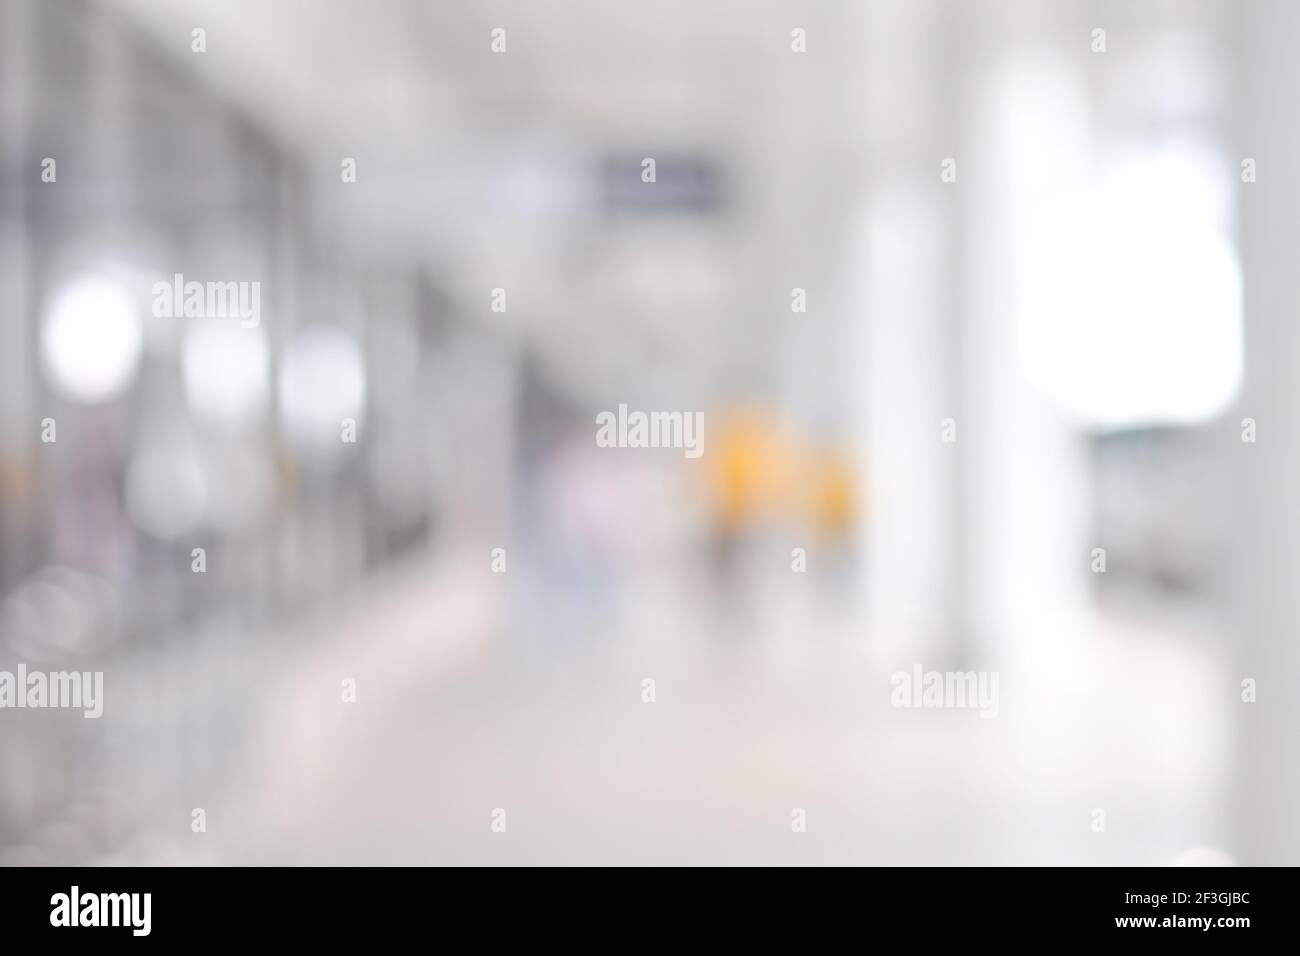 White blur abstract background from building hallway (corridor) Stock Photo